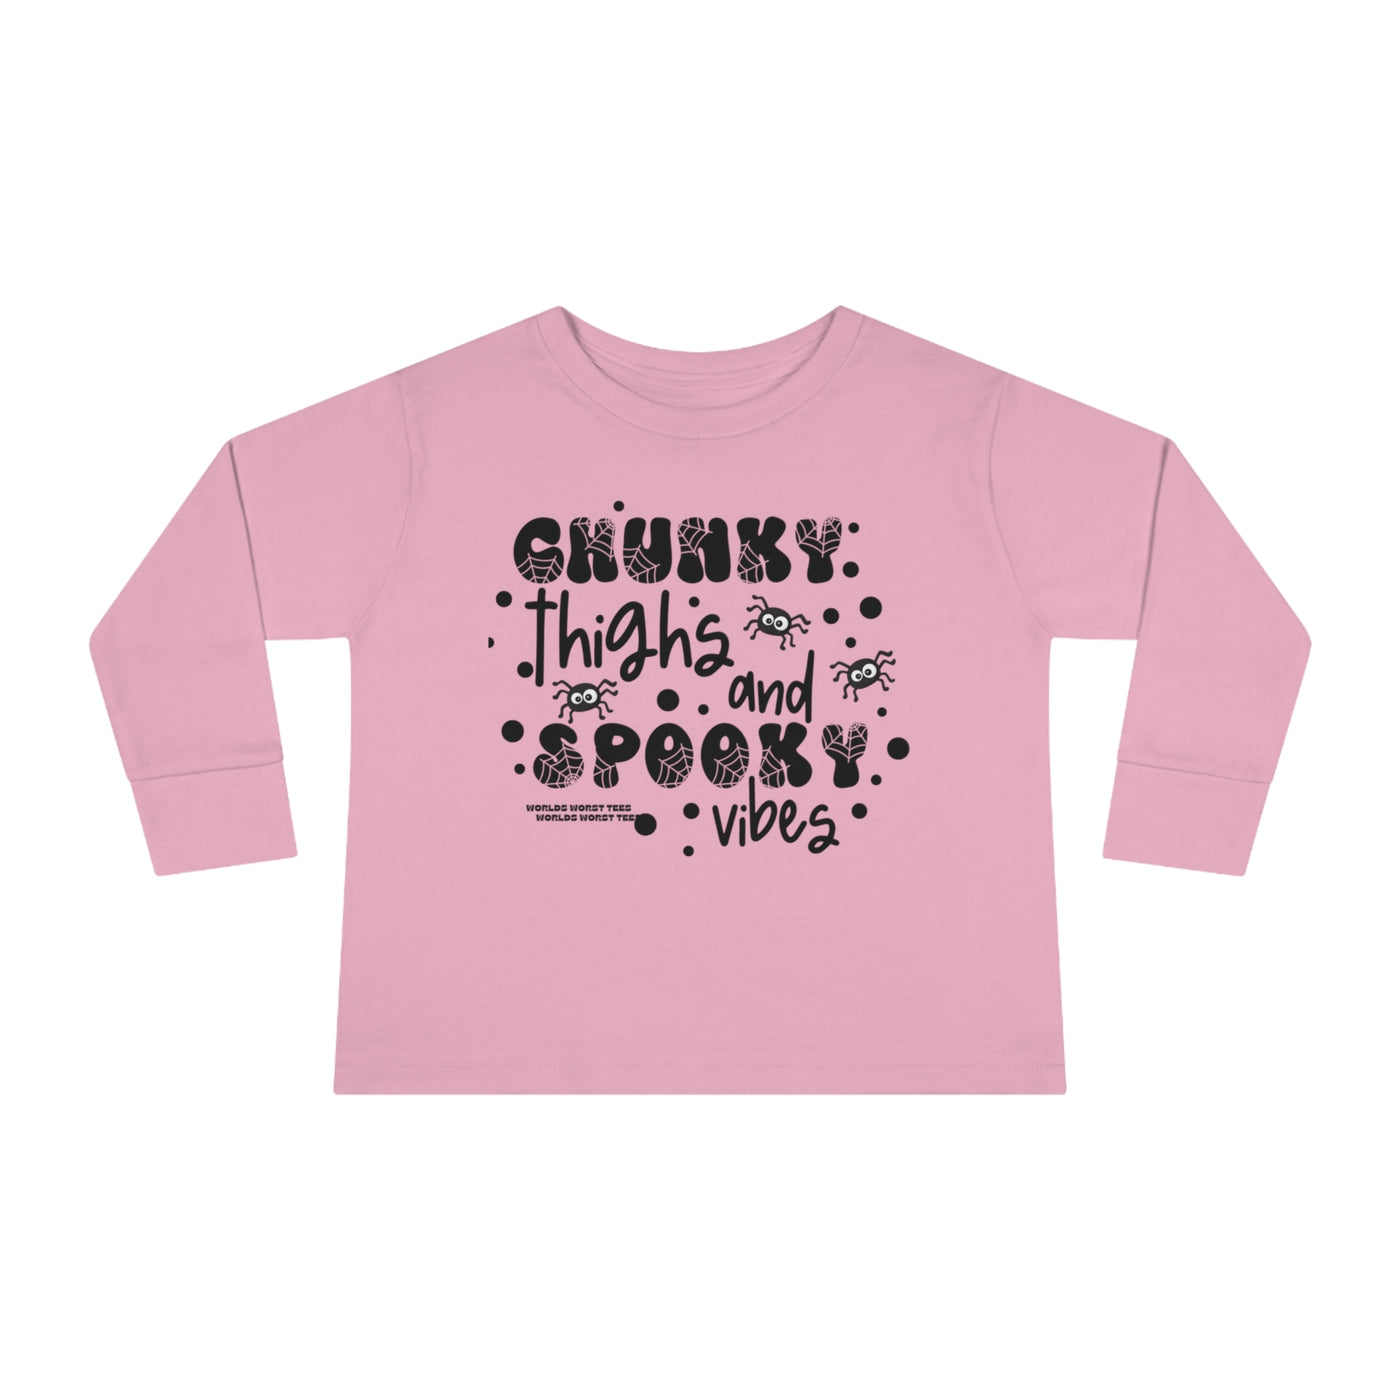 Chunky Thighs and Spooky Vibes Toddler Long Sleeve Tee